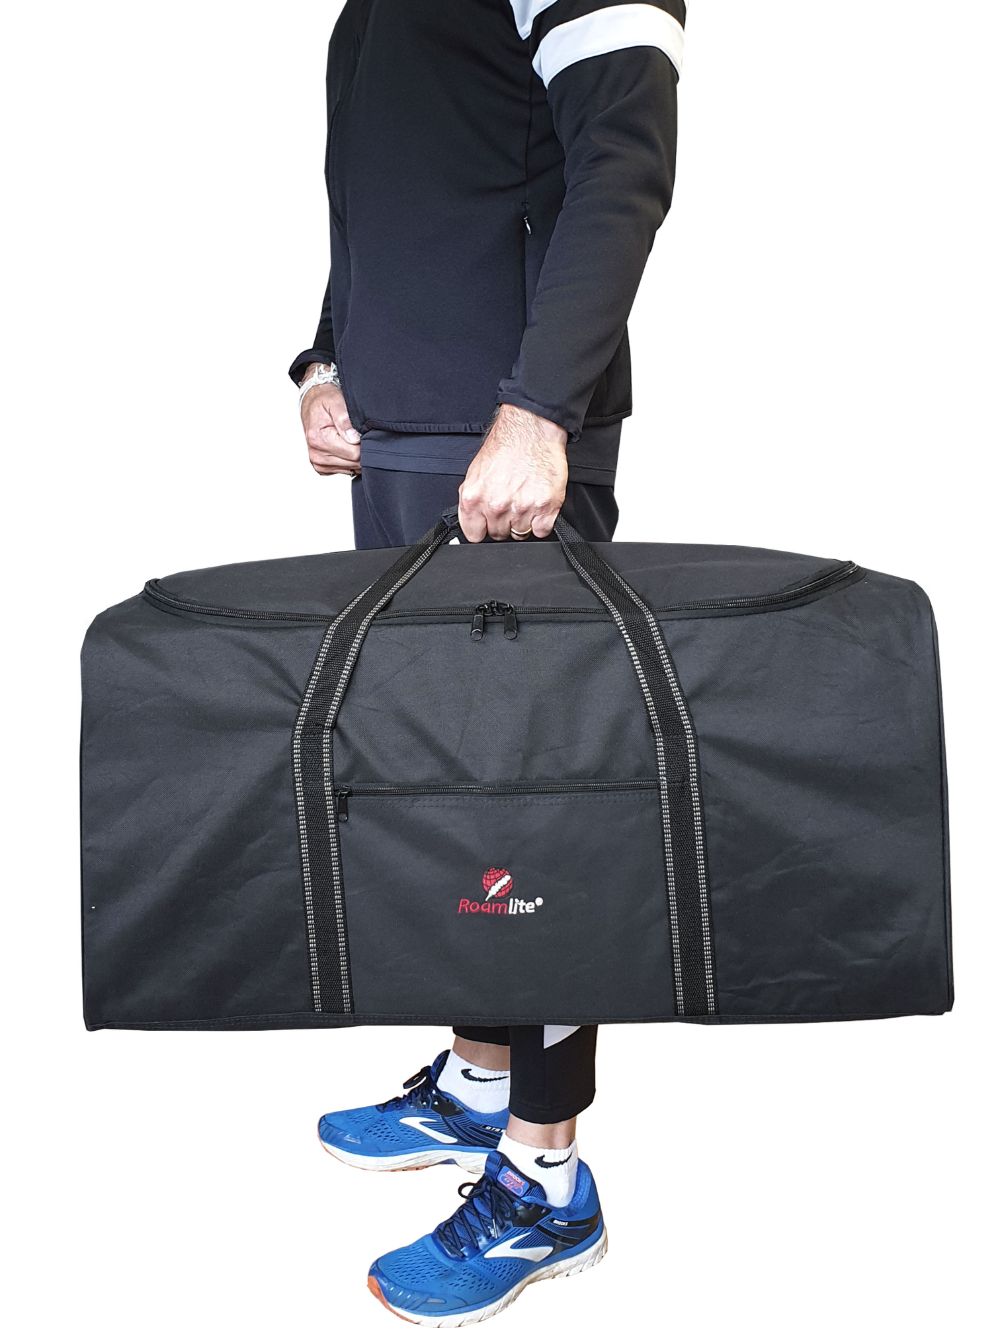 Roamlite Extra Large 29 XXL Duffel Holdall - X-L Size Very Big Travel Bags  - Huge Duffle for Storage, Travelling, Sports Kit or Laundry - 29 inch